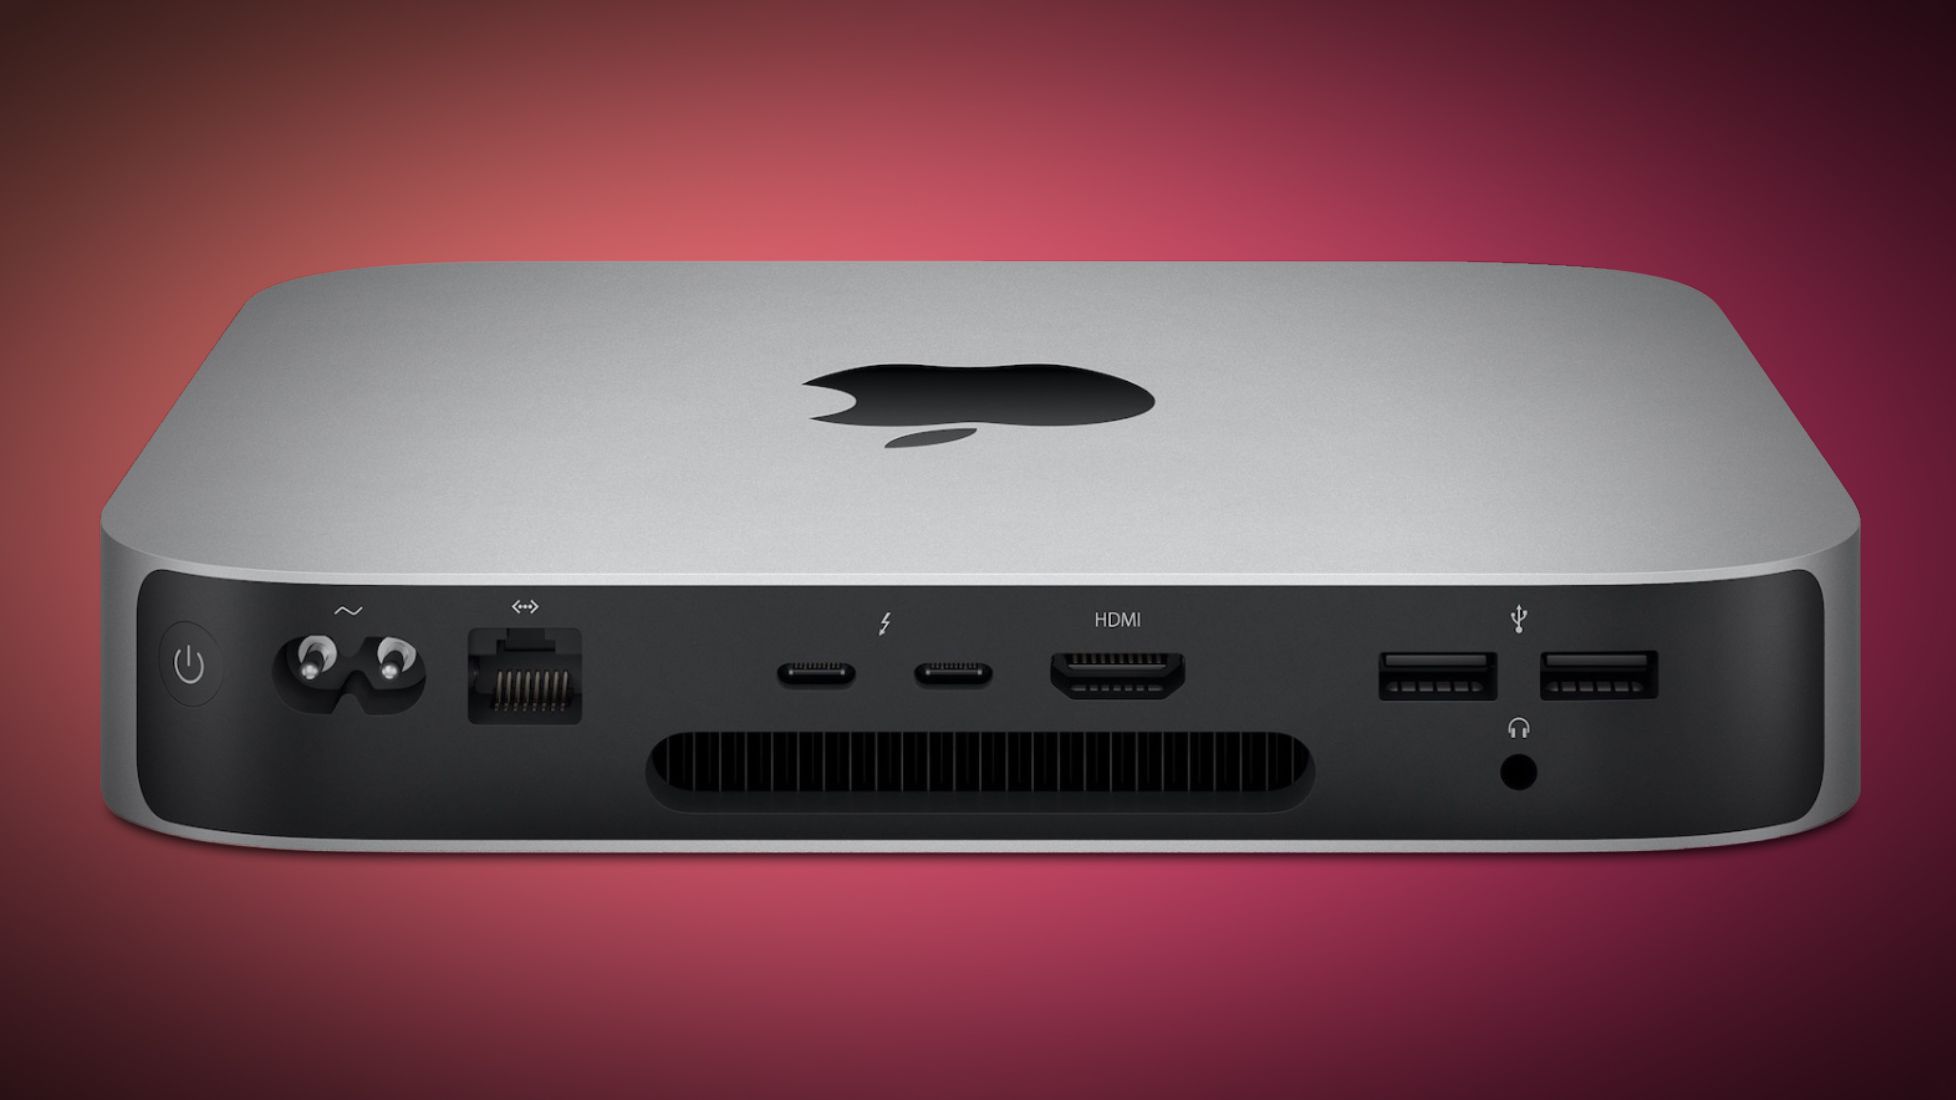 Deals: Get Apple's 512GB M1 Mac Mini for Record Low of $799 on Amazon